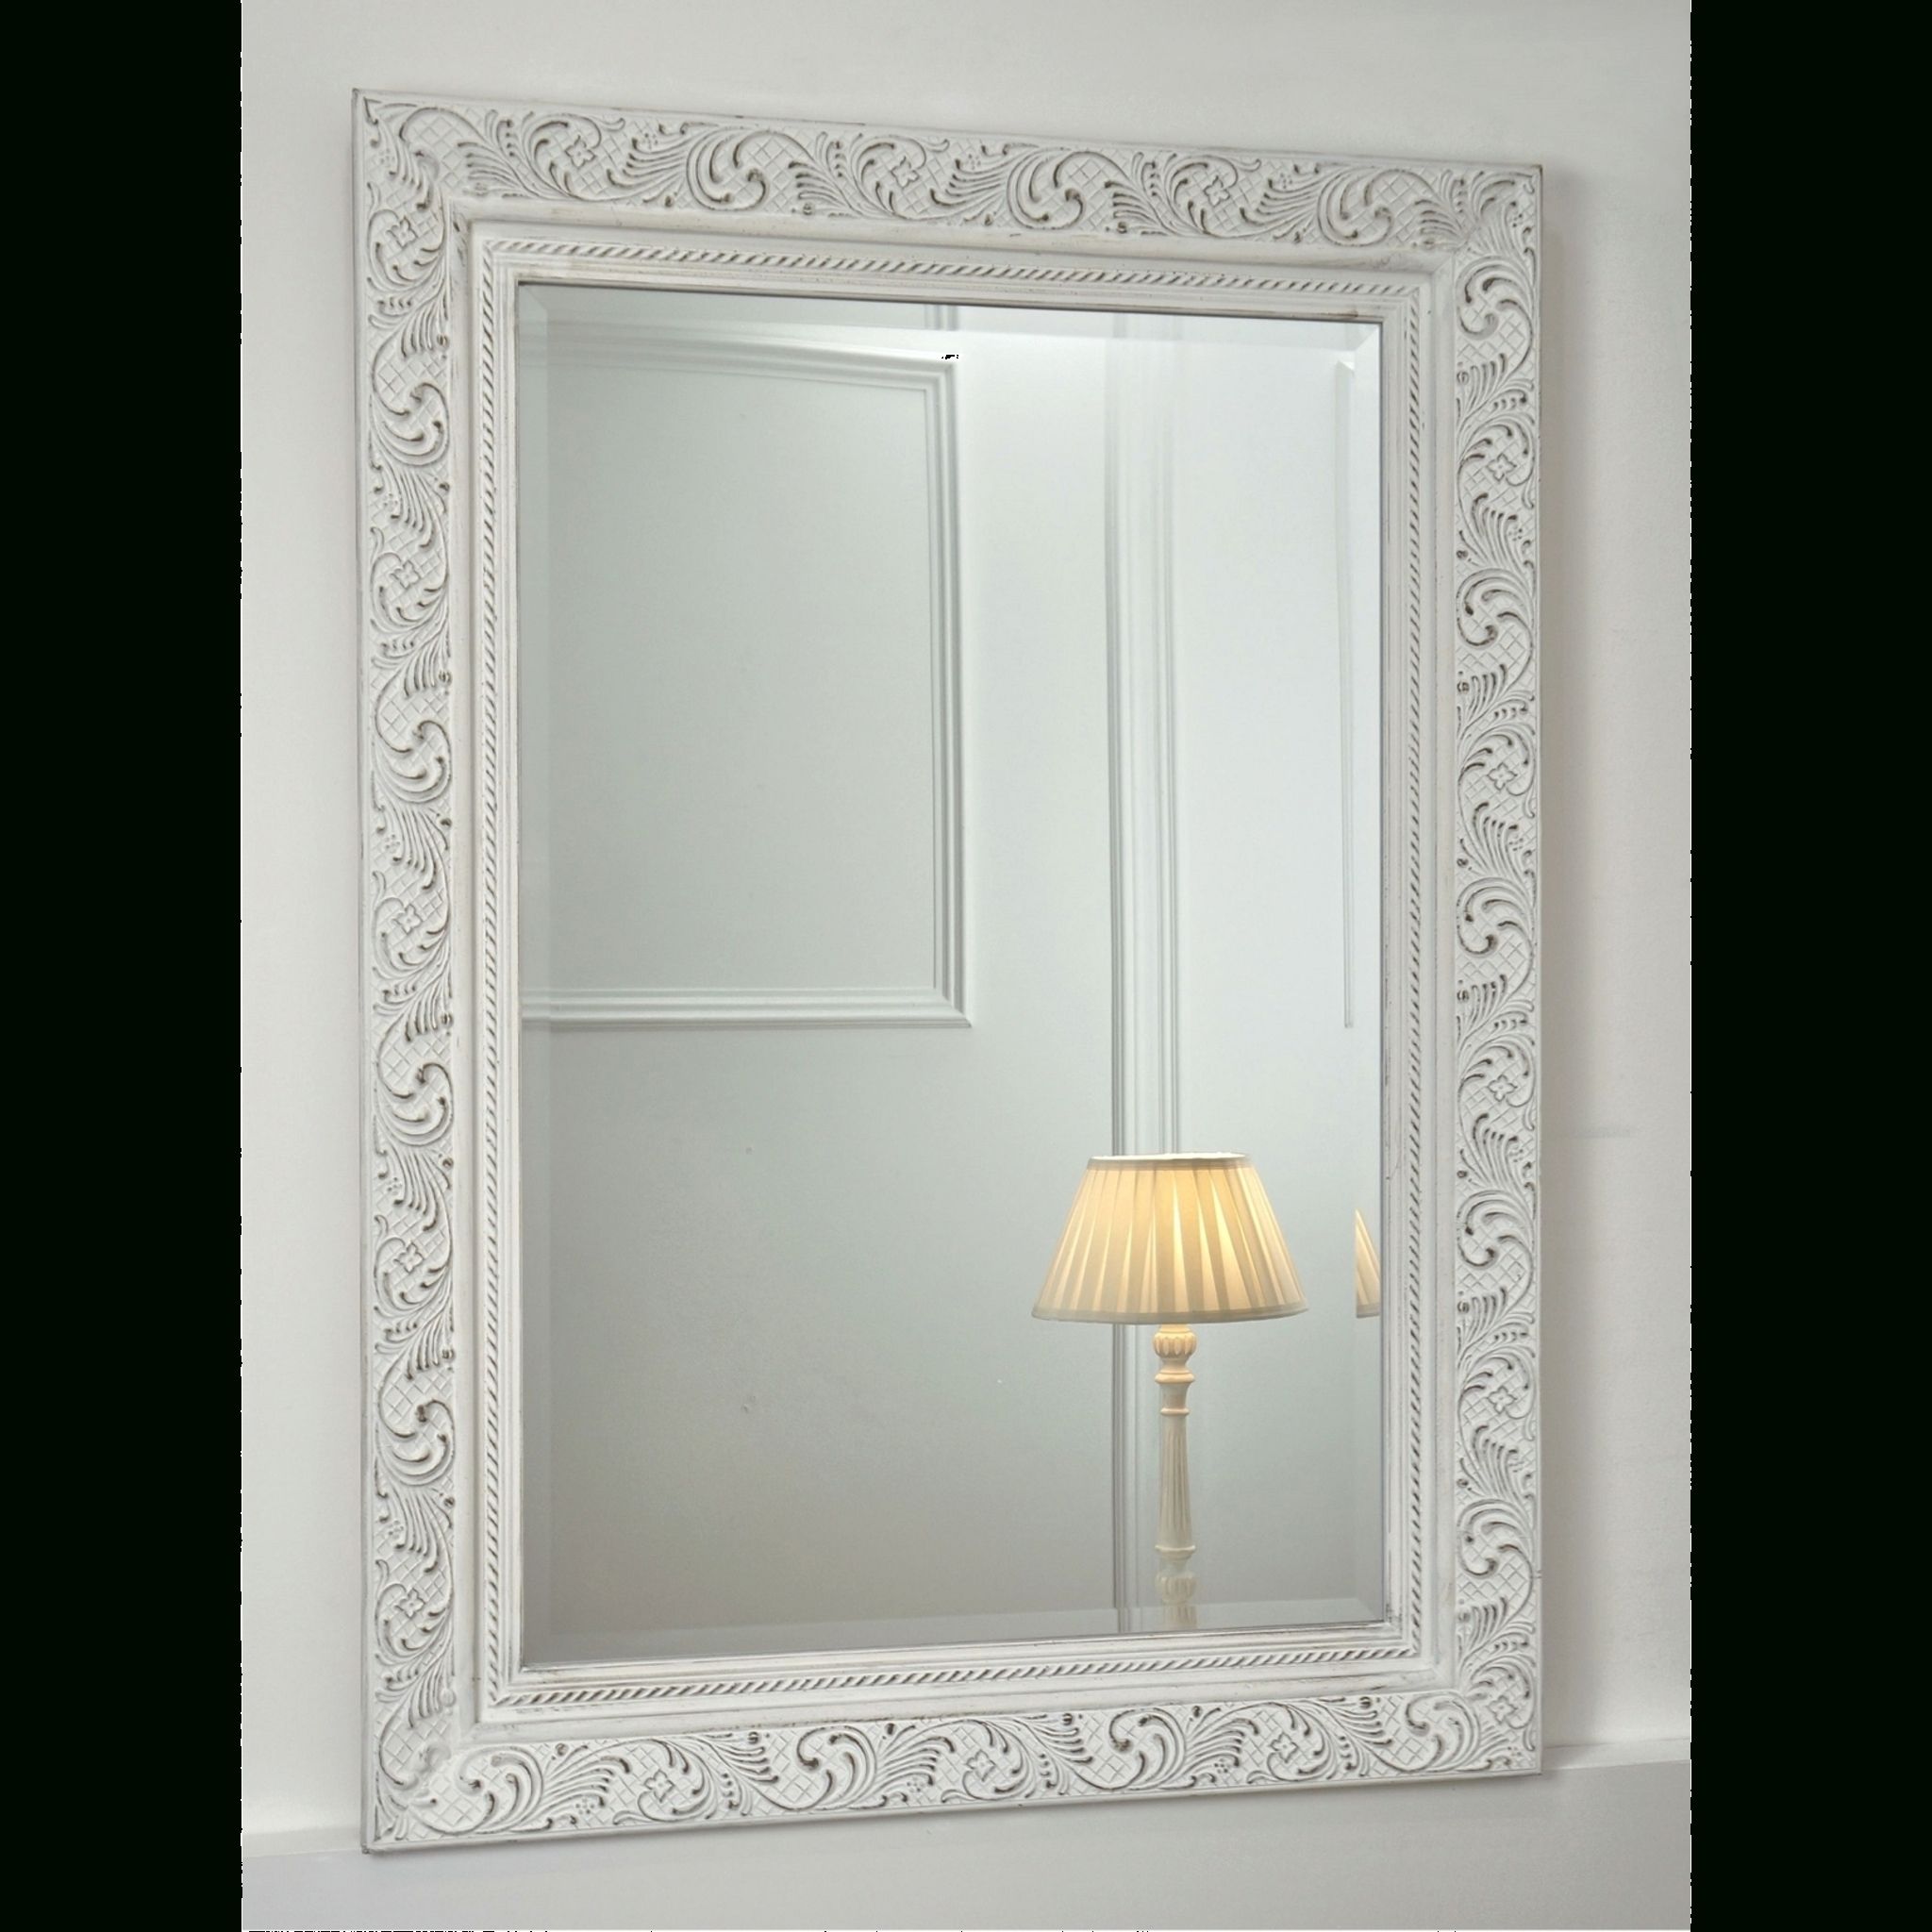 Mirror : Large Mirrors Decorative Wonderful Gold Shabby Chic With Regard To Shabby Chic Gold Mirrors (View 3 of 15)